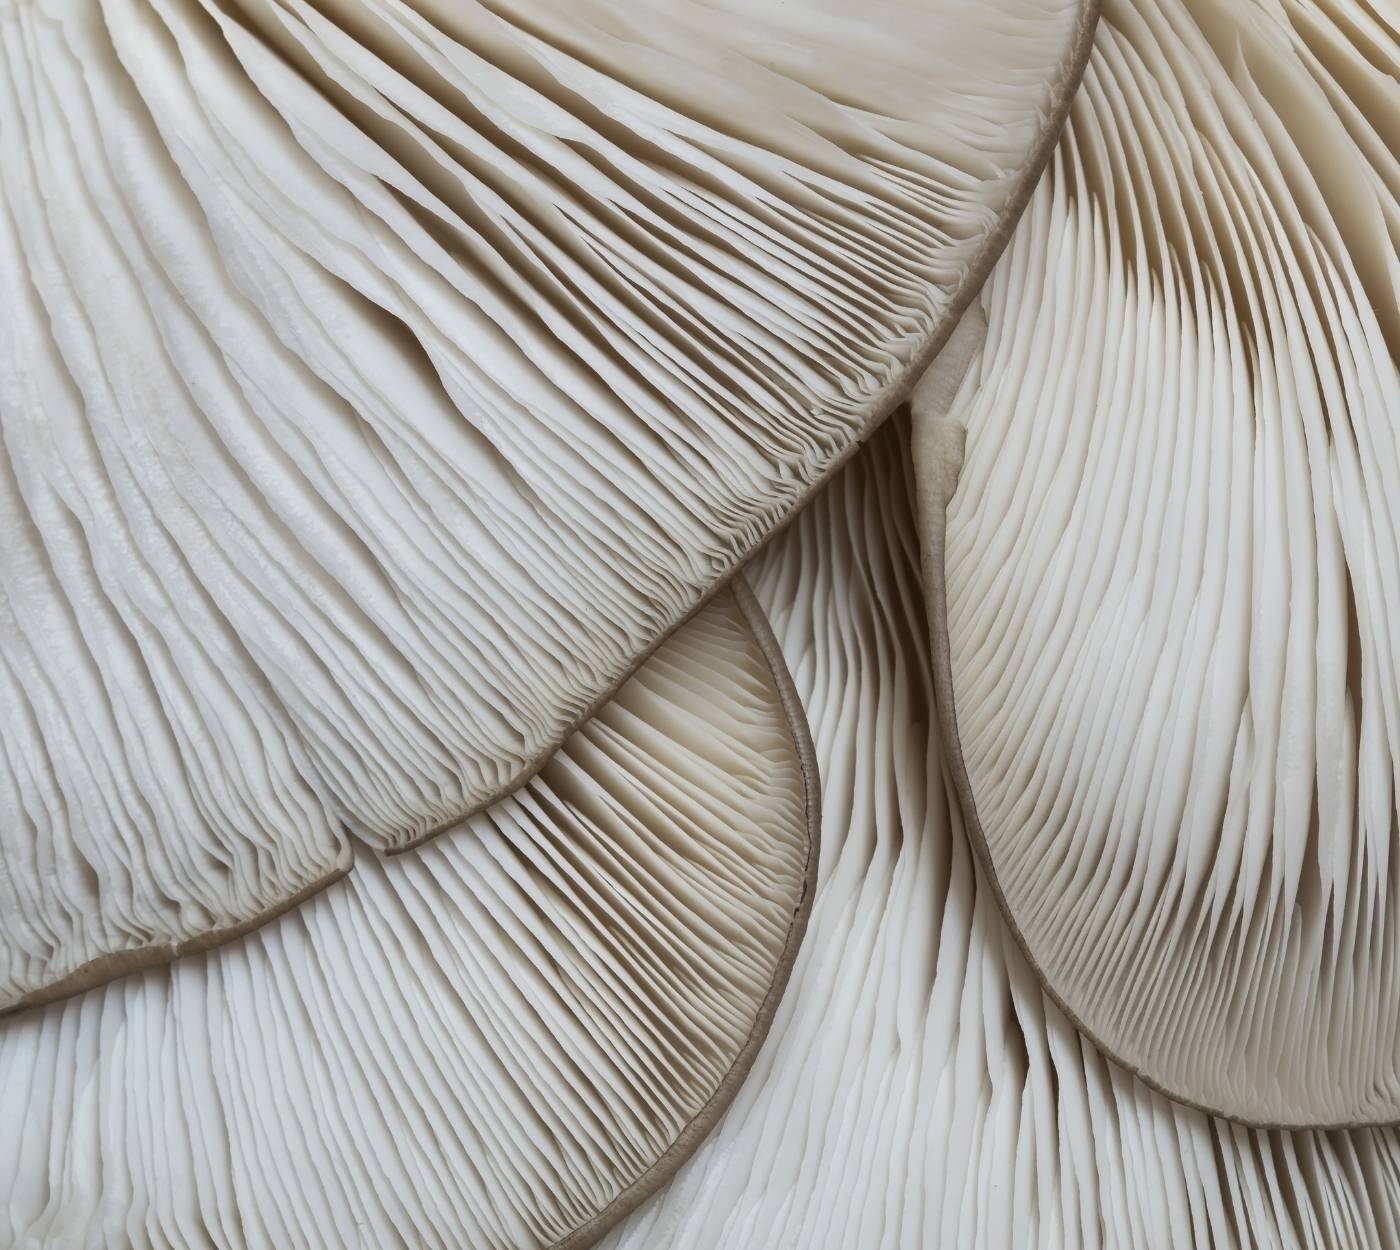 The gills of a blue oyster mushroom.